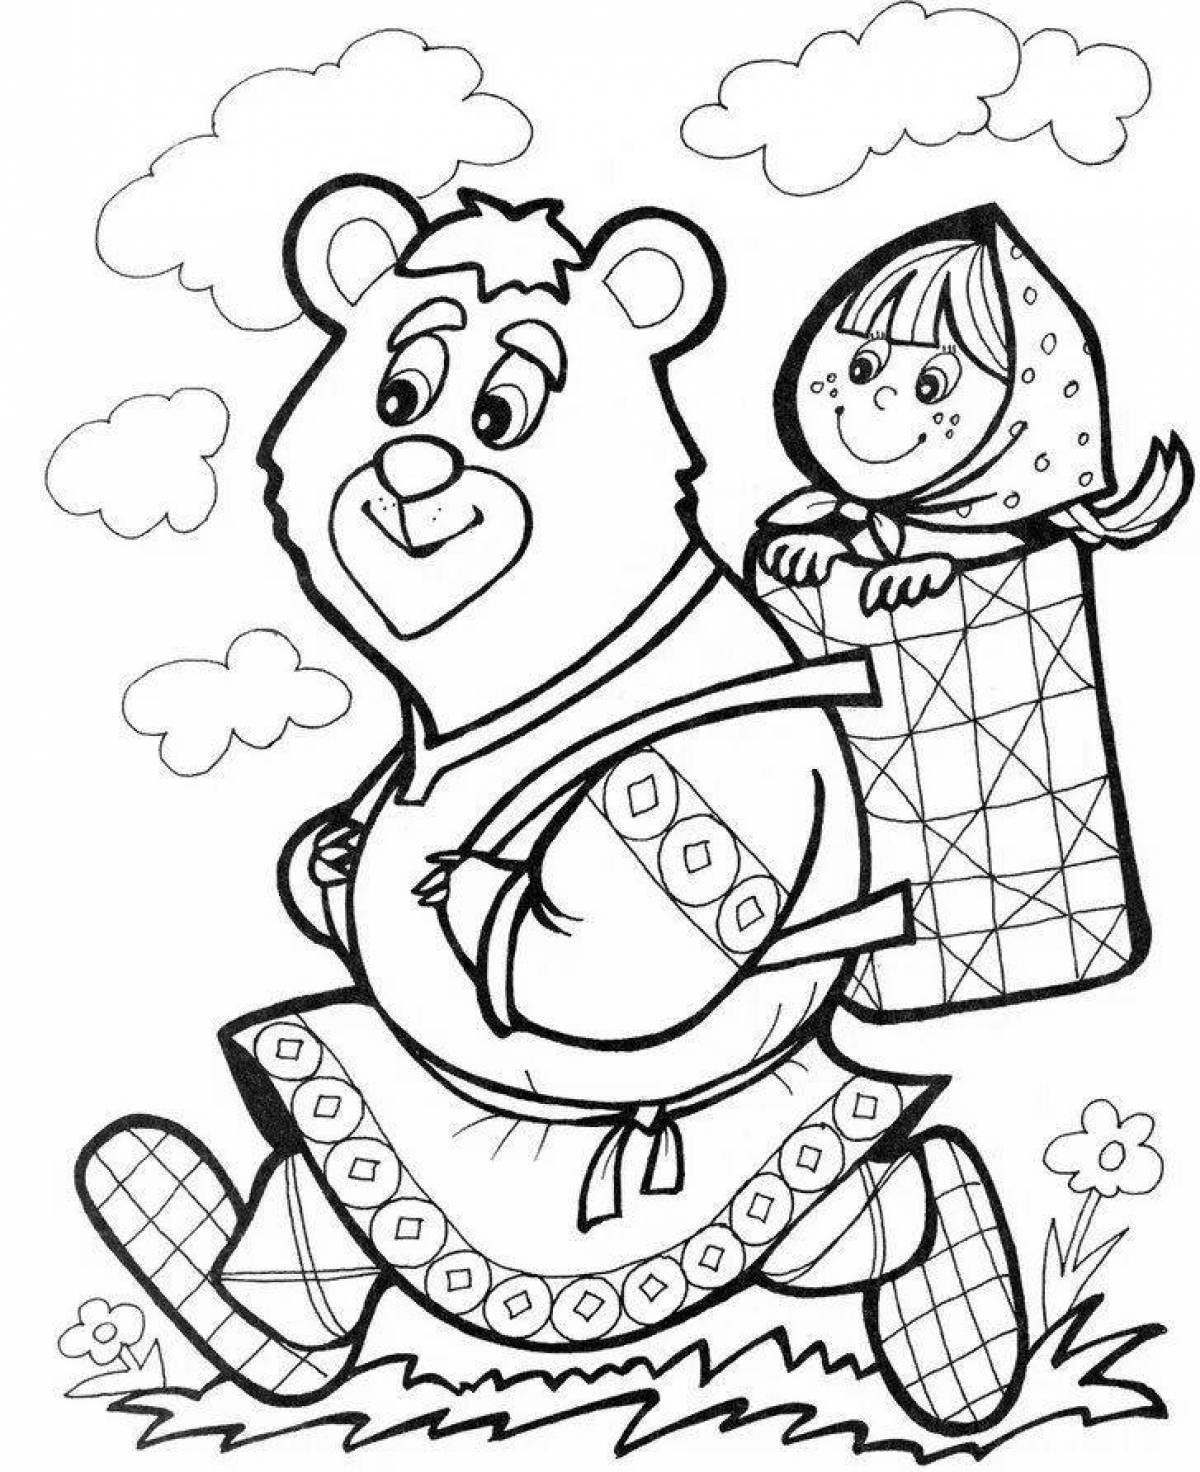 Adorable fairy tale characters coloring book for kids